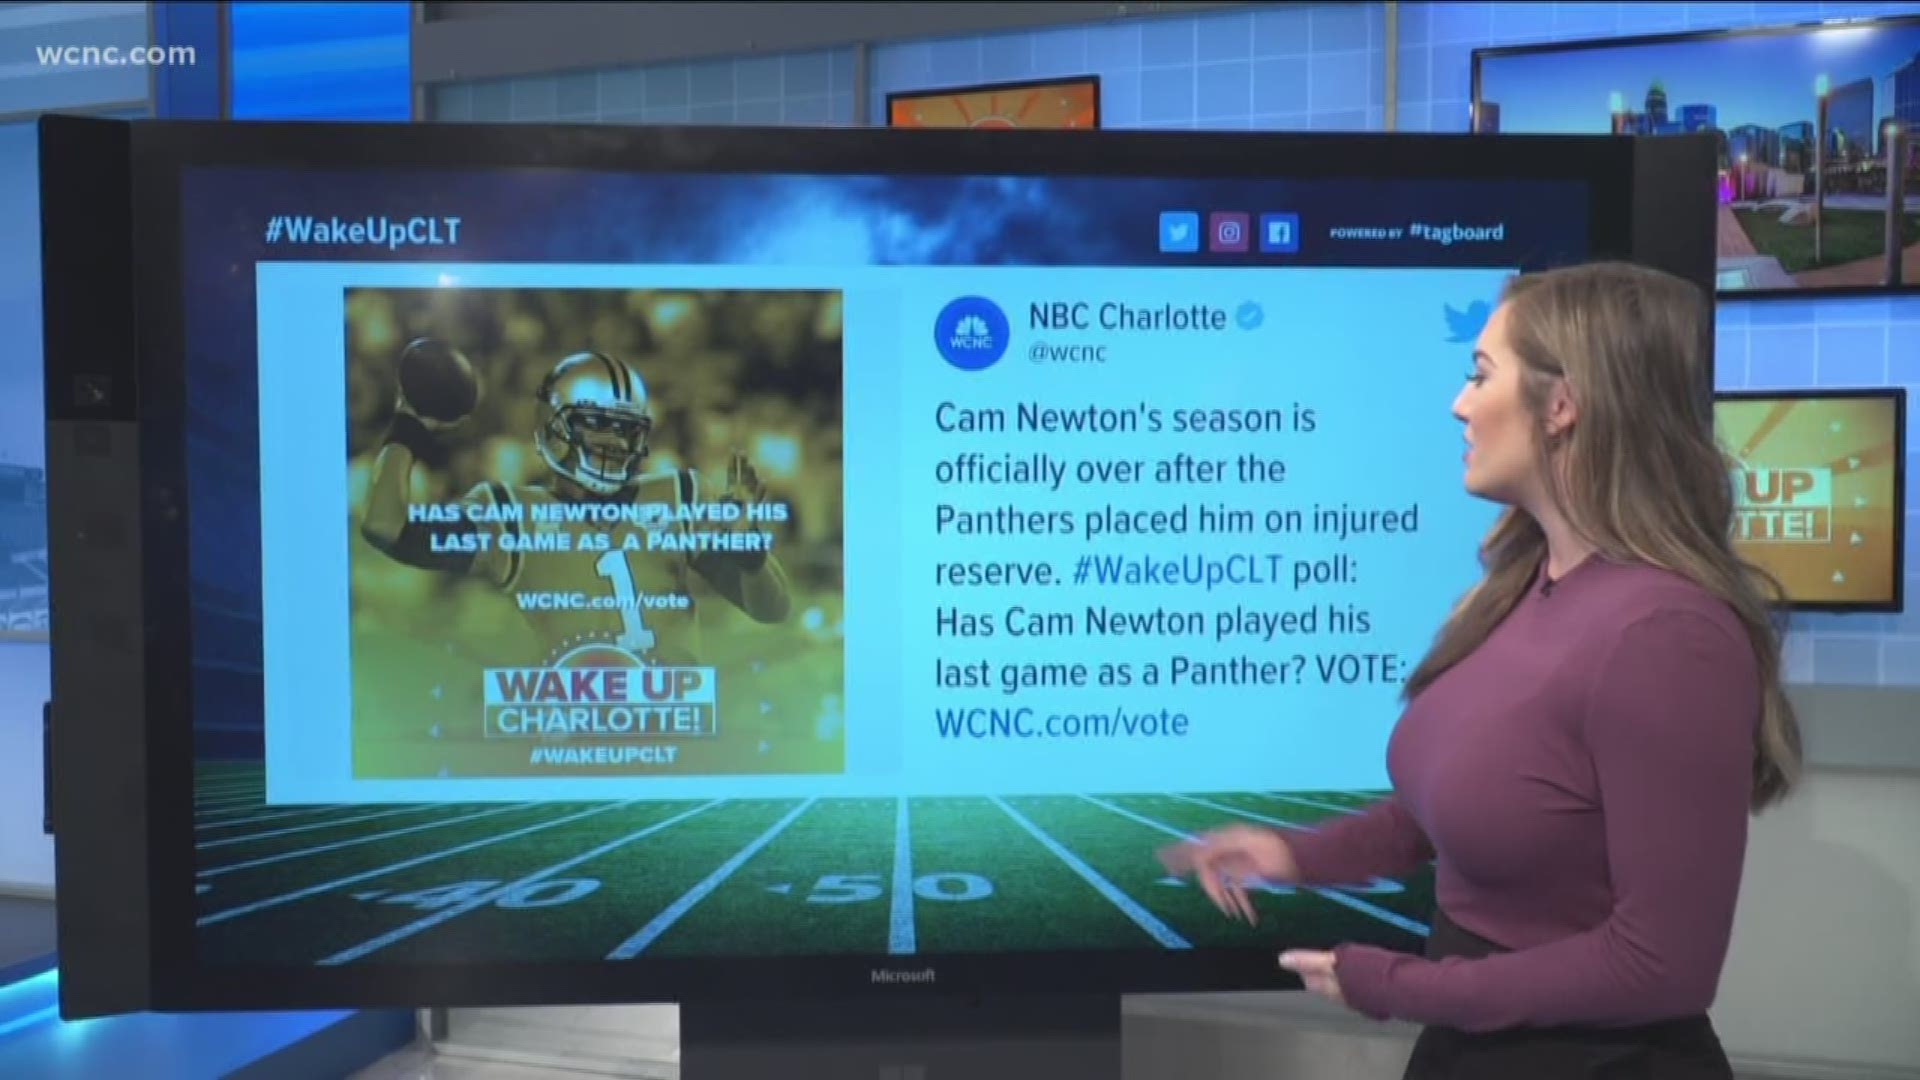 Cam Newton's season is officially over after he was placed on injured reserve. Given the circumstances, will he return to the Panthers next season?